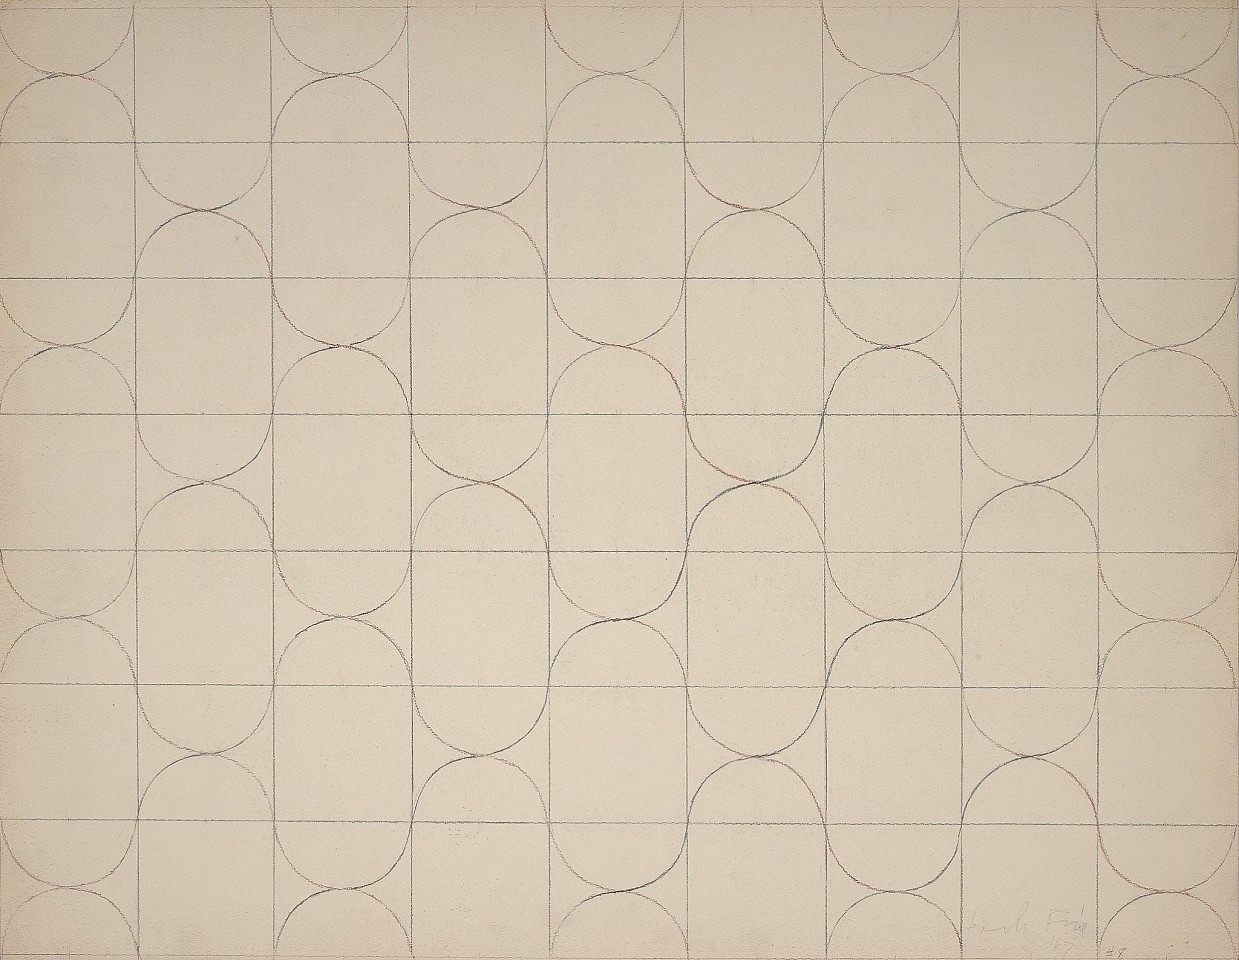 Perle Fine, Untitled #8 | SOLD, 1967
Black and brown pencil on paper, 22 x 28 in. (55.9 x 71.1 cm)
© AE Artworks
FIN-00008